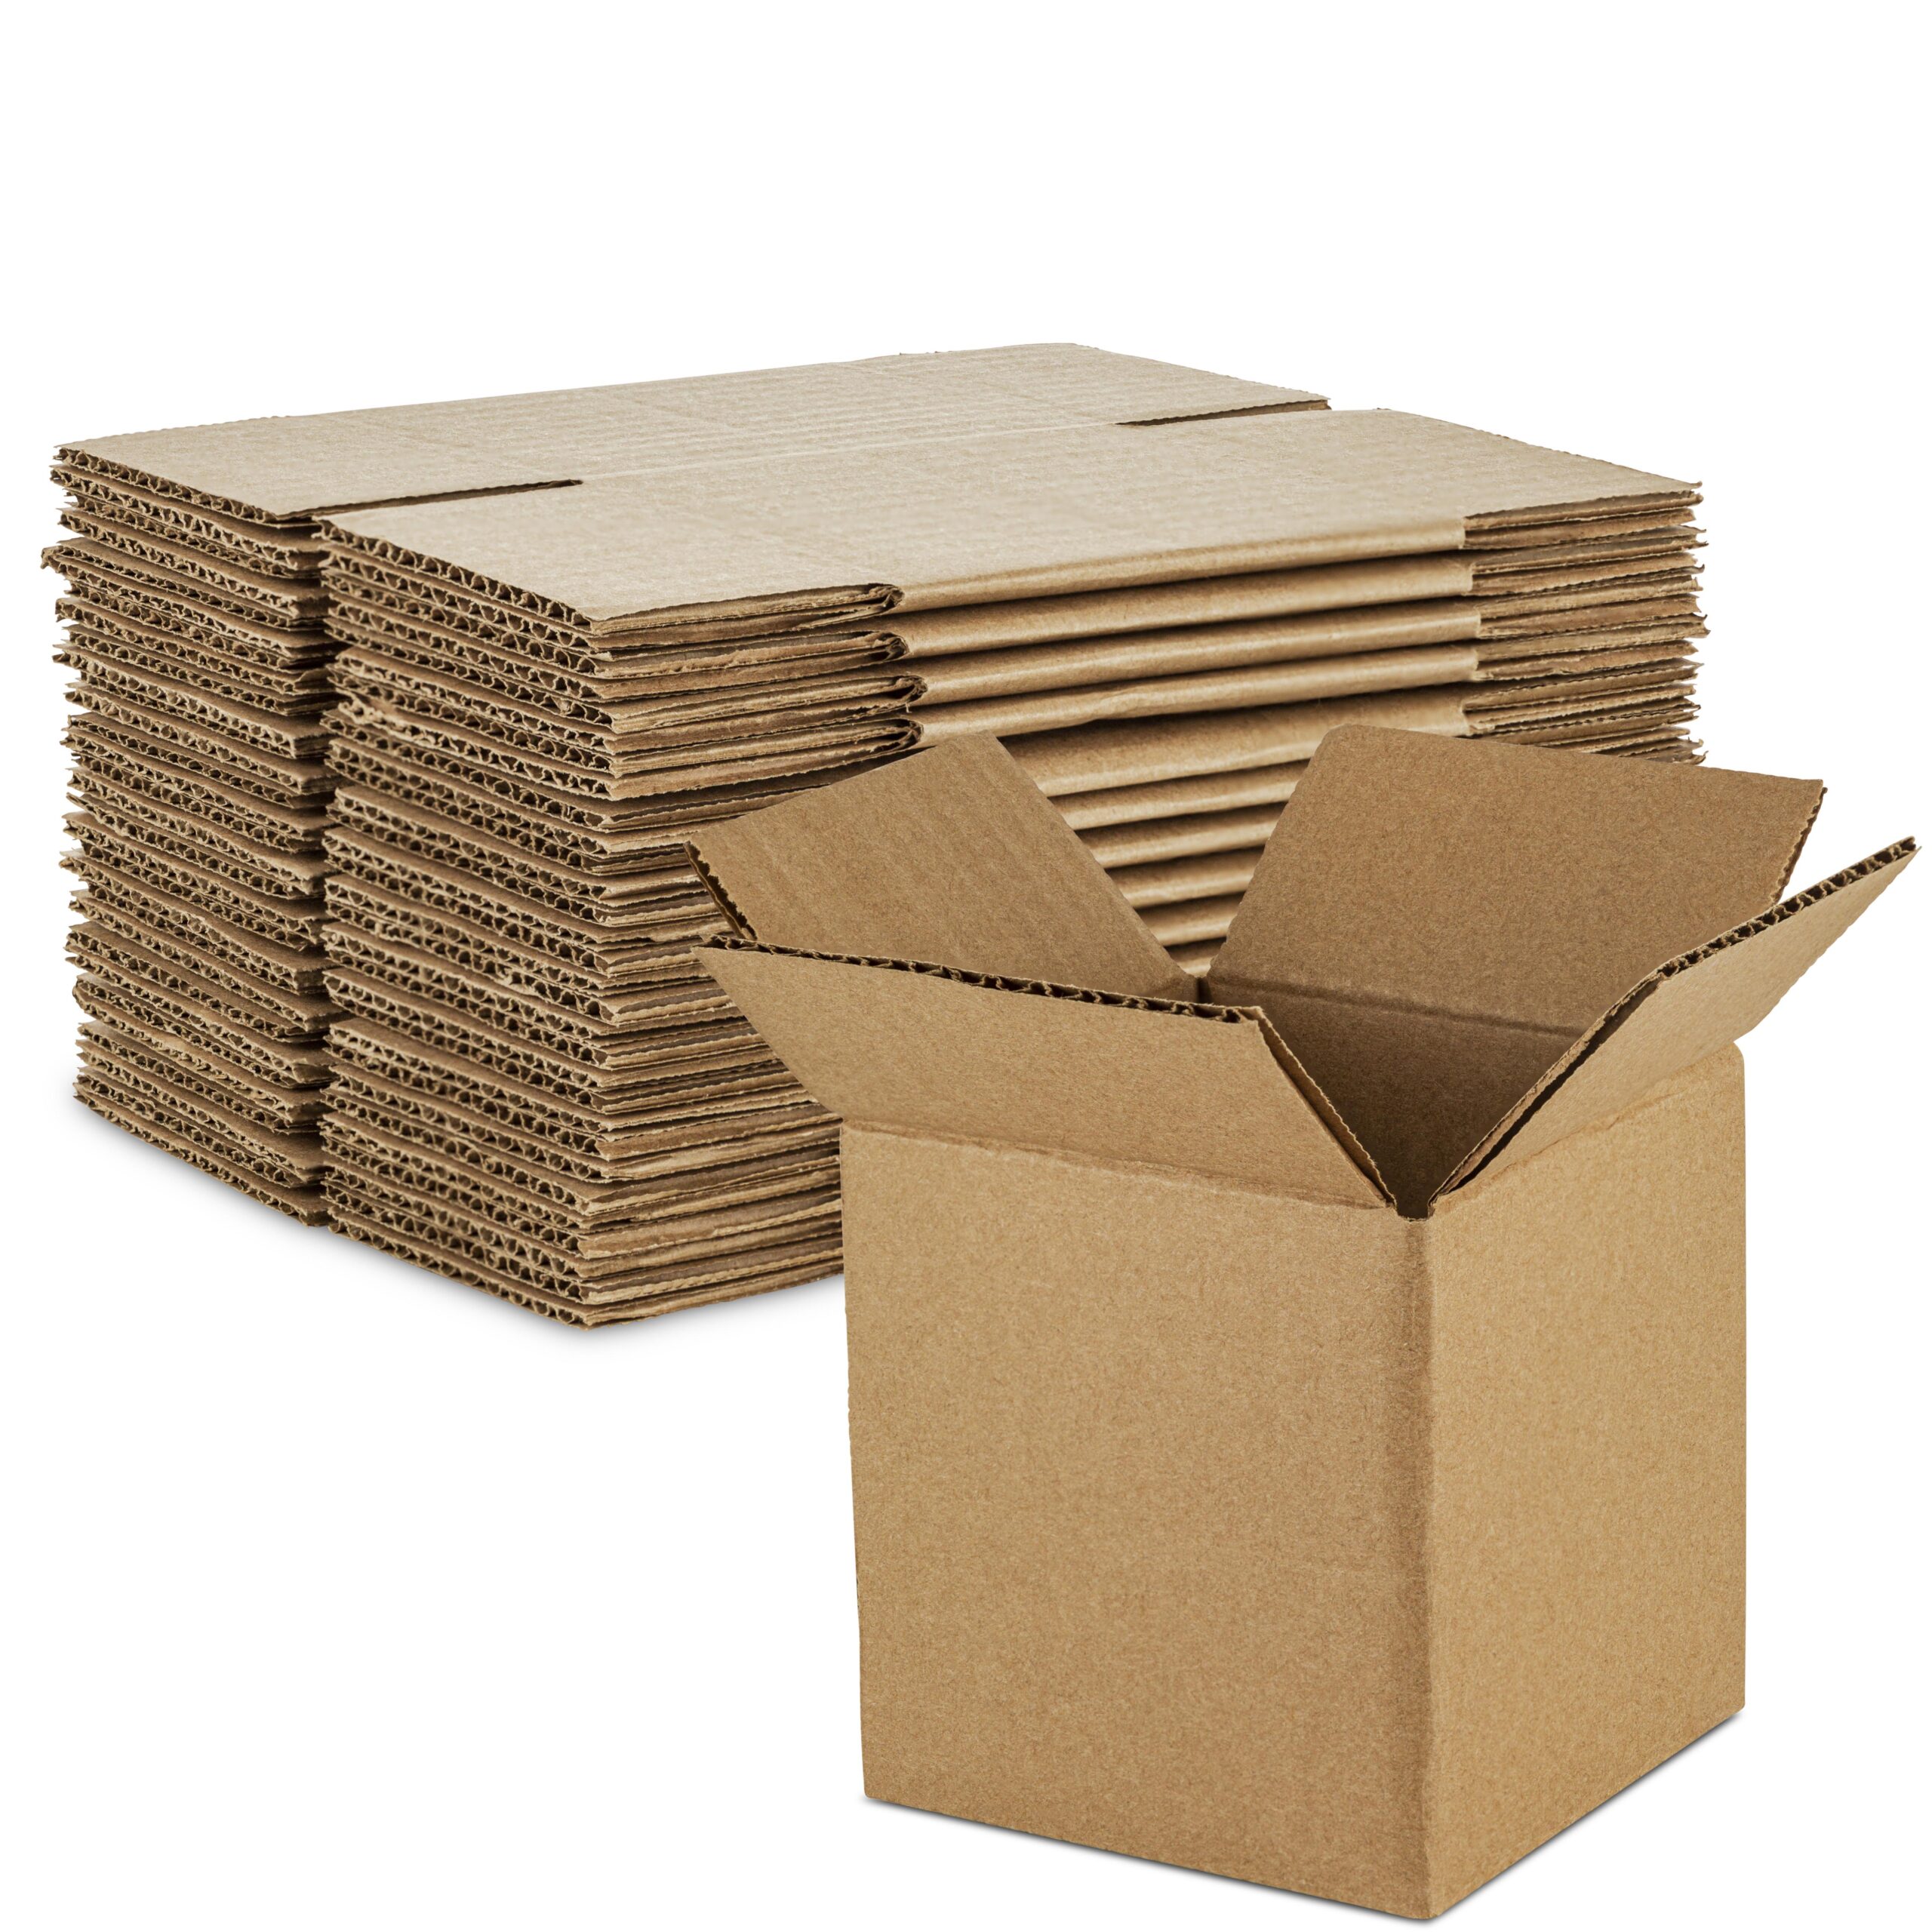 https://mtproducts.com/wp-content/uploads/2022/08/Cardboard-Box-Brown-main-scaled.jpg